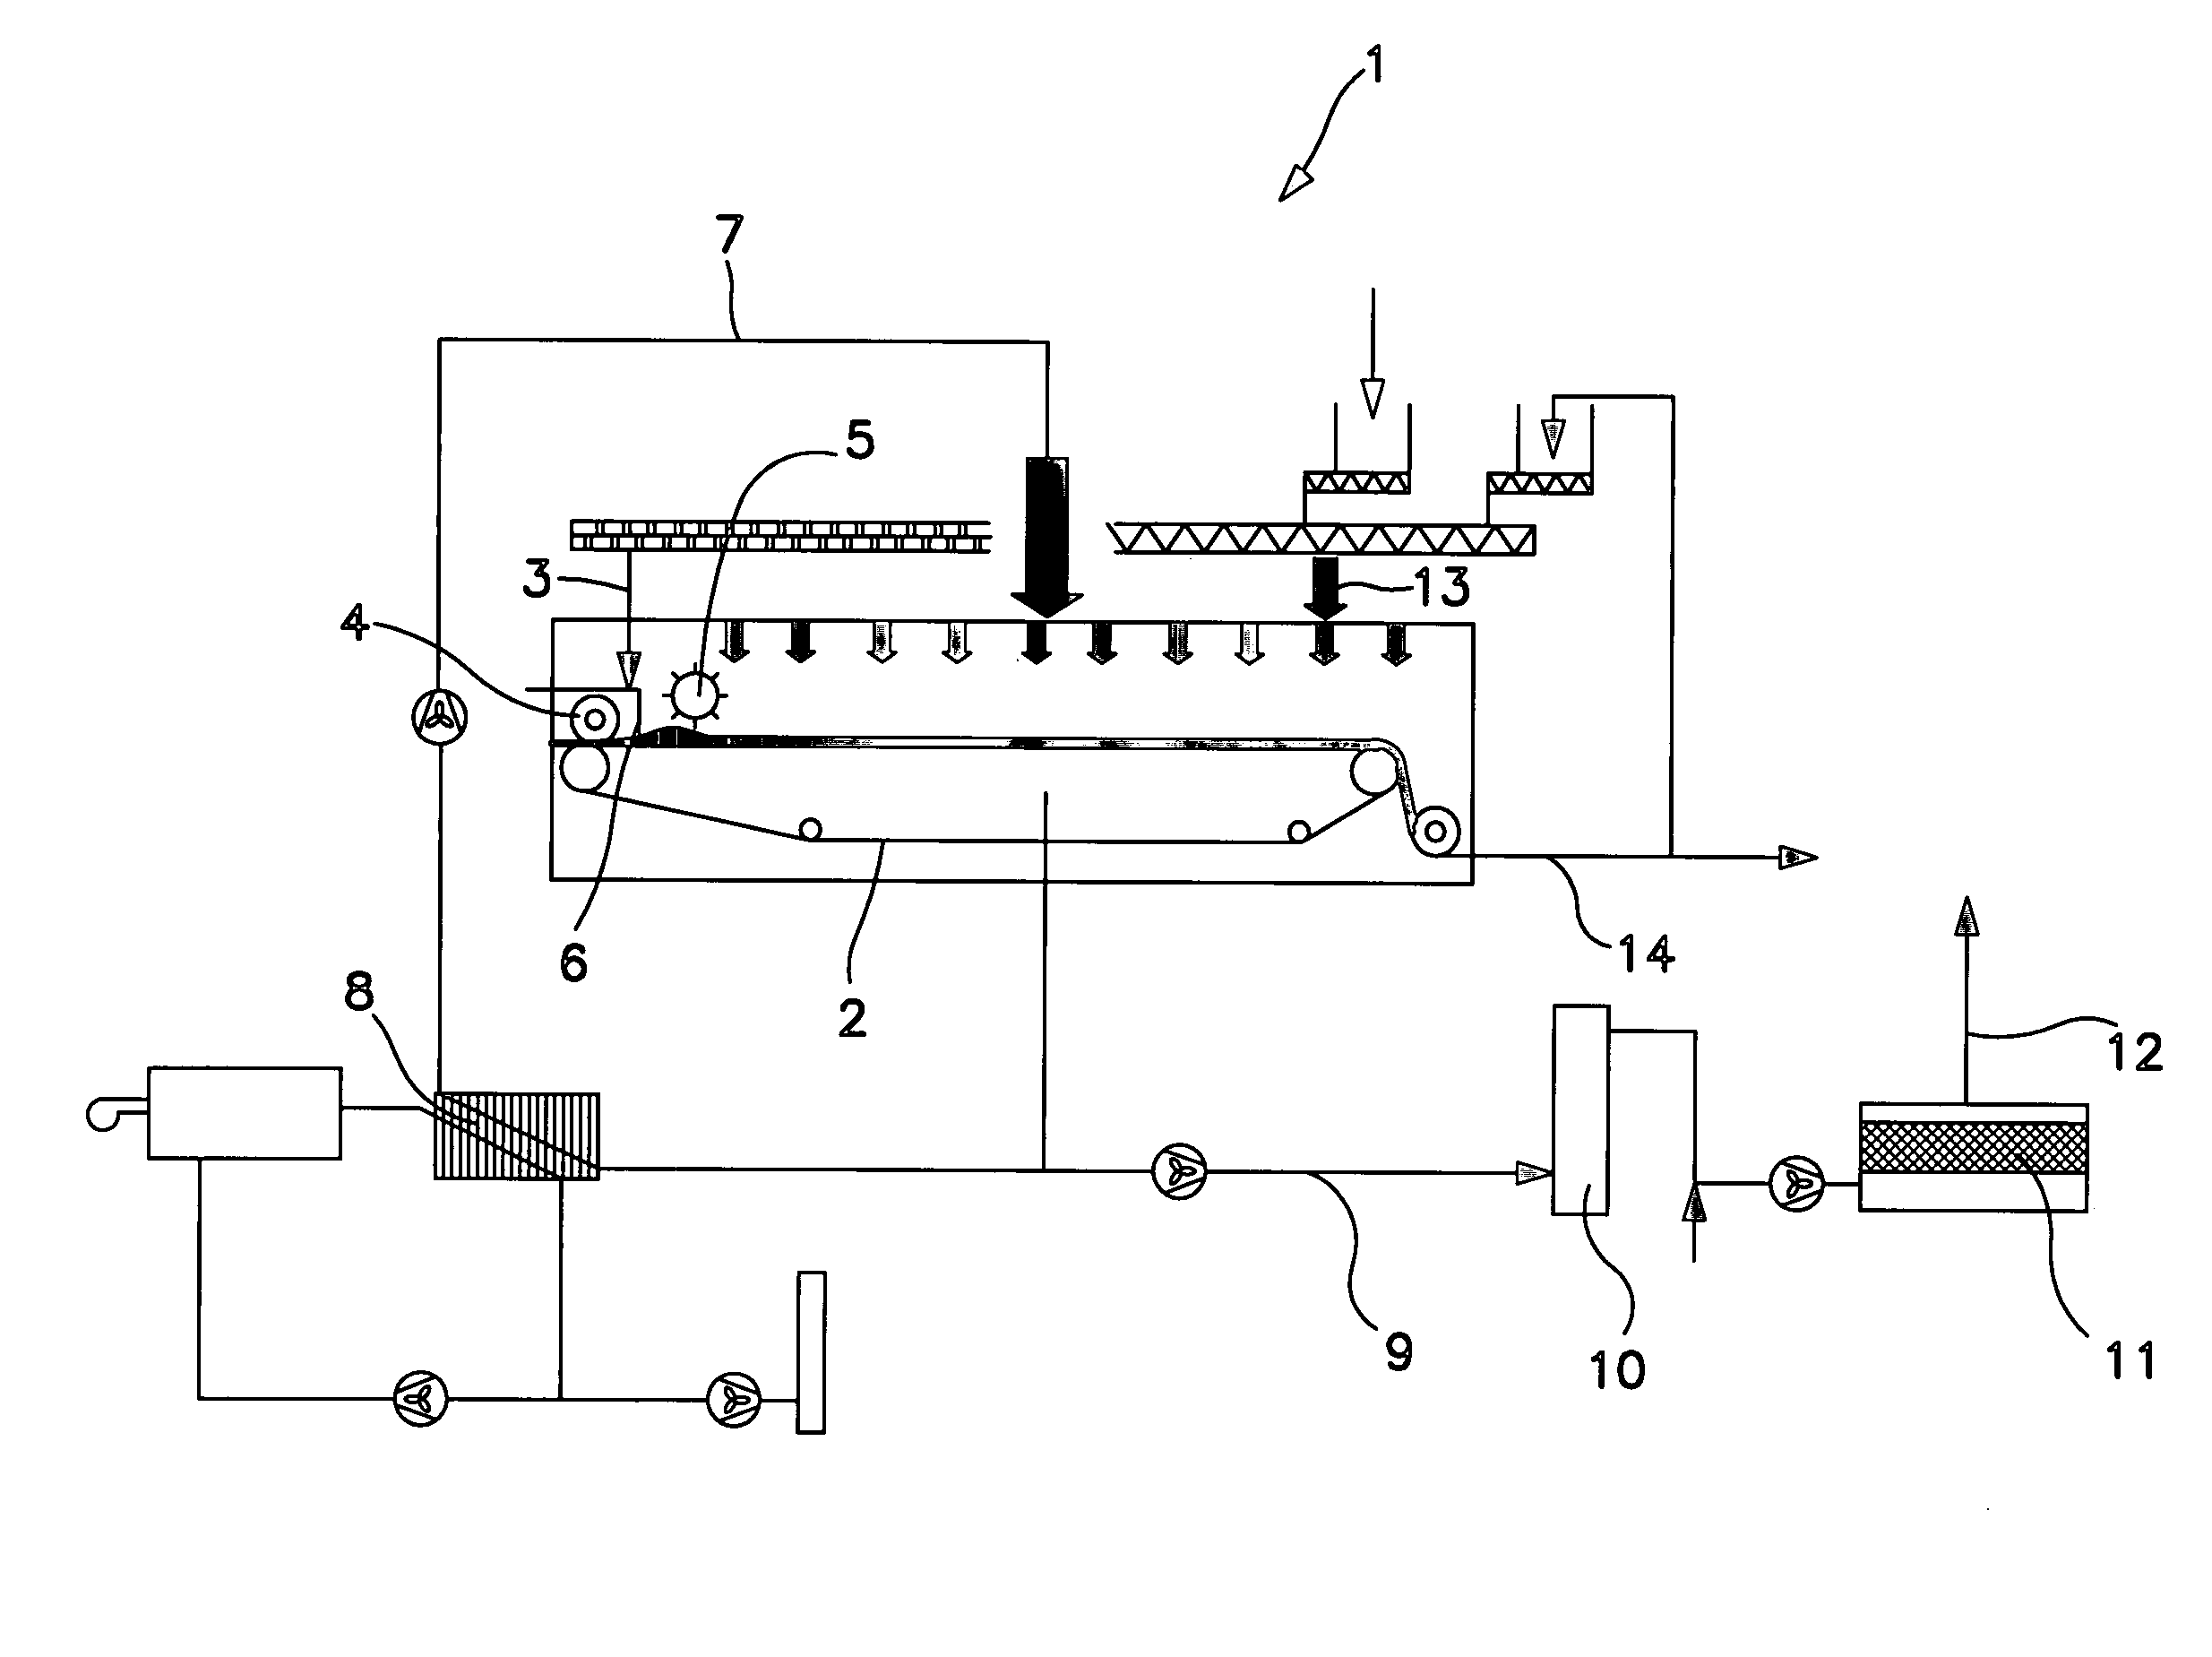 Device for continuous drying of material